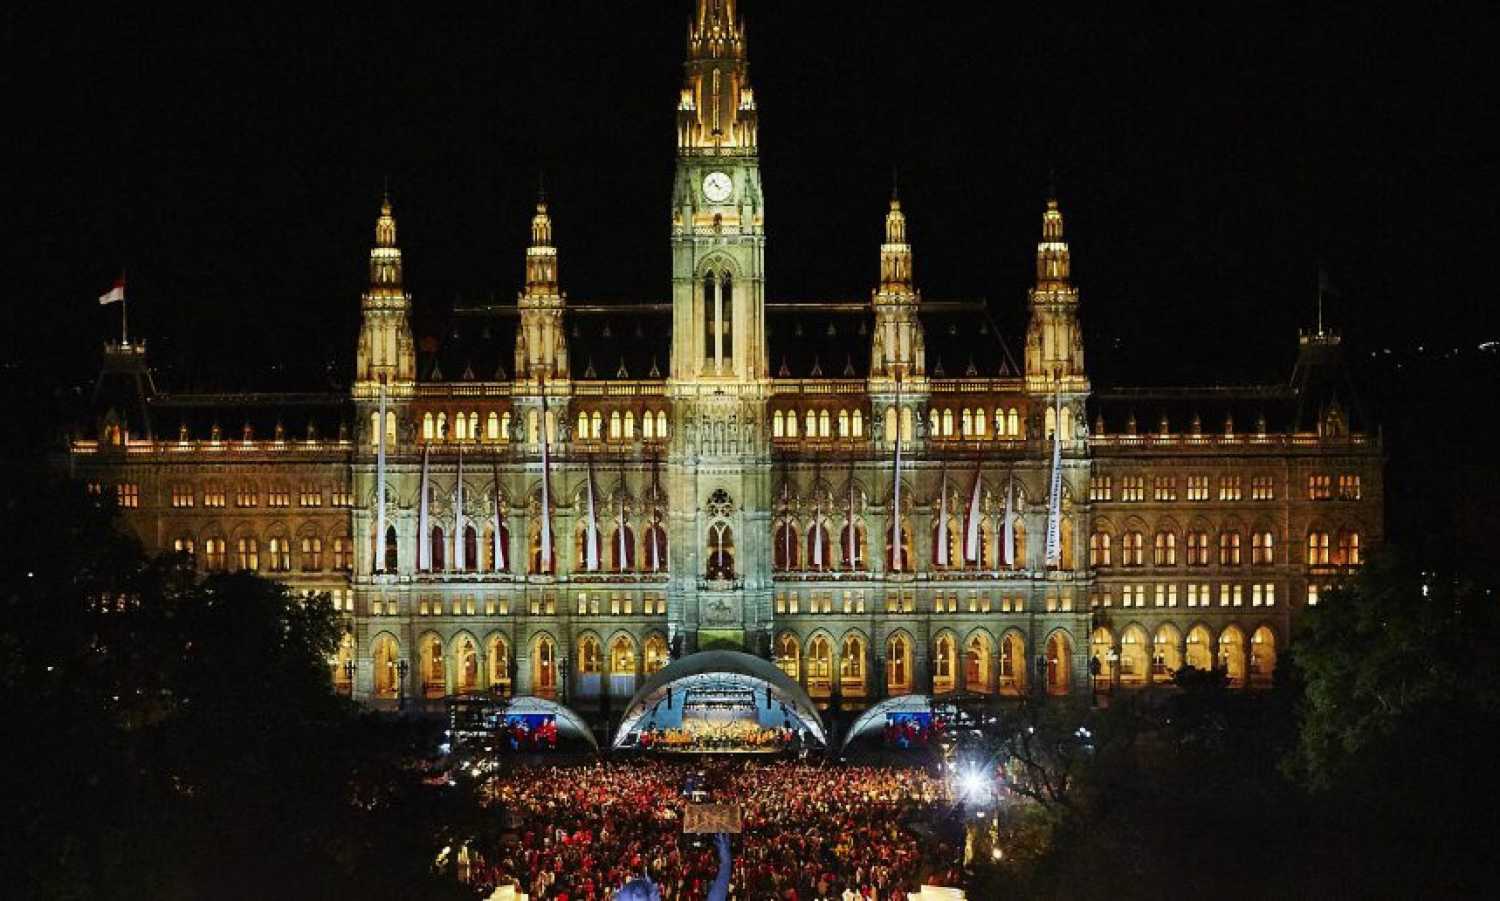 The festival was staged in Vienna’s main square and broadcast worldwide